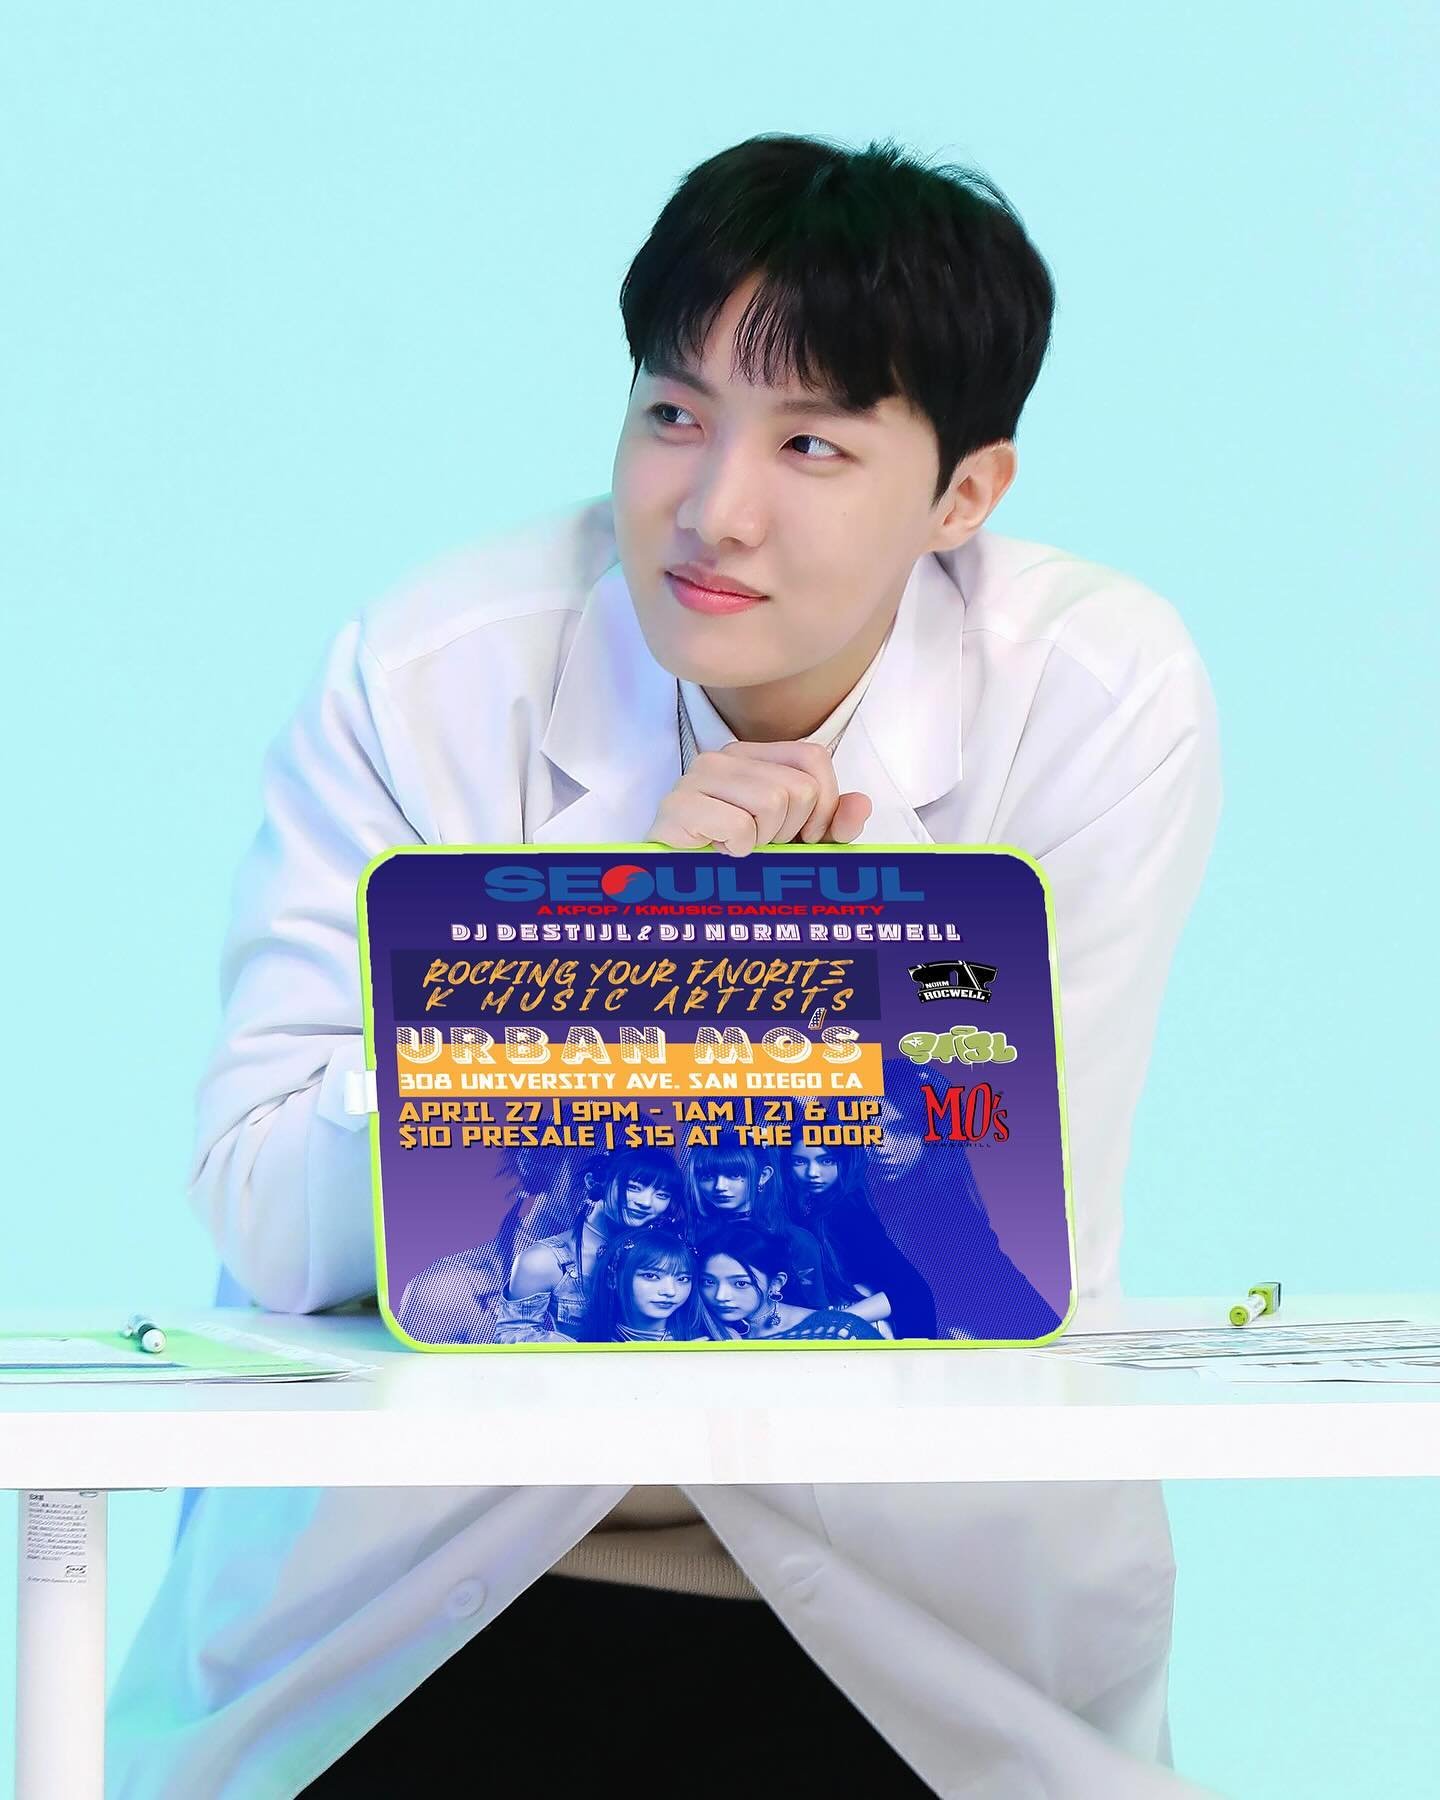 Hobi has the right idea for this Saturday&rsquo;s K Pop | K R&amp;B | K Hip Hop night! See you at @urbanmos for @seoulfulparty with @djnormrocwell &amp; @__destijl__ rocking Ateez to Zico through the night! #kpop #kpopdj #kpopsandiego #urbanmos #kpop